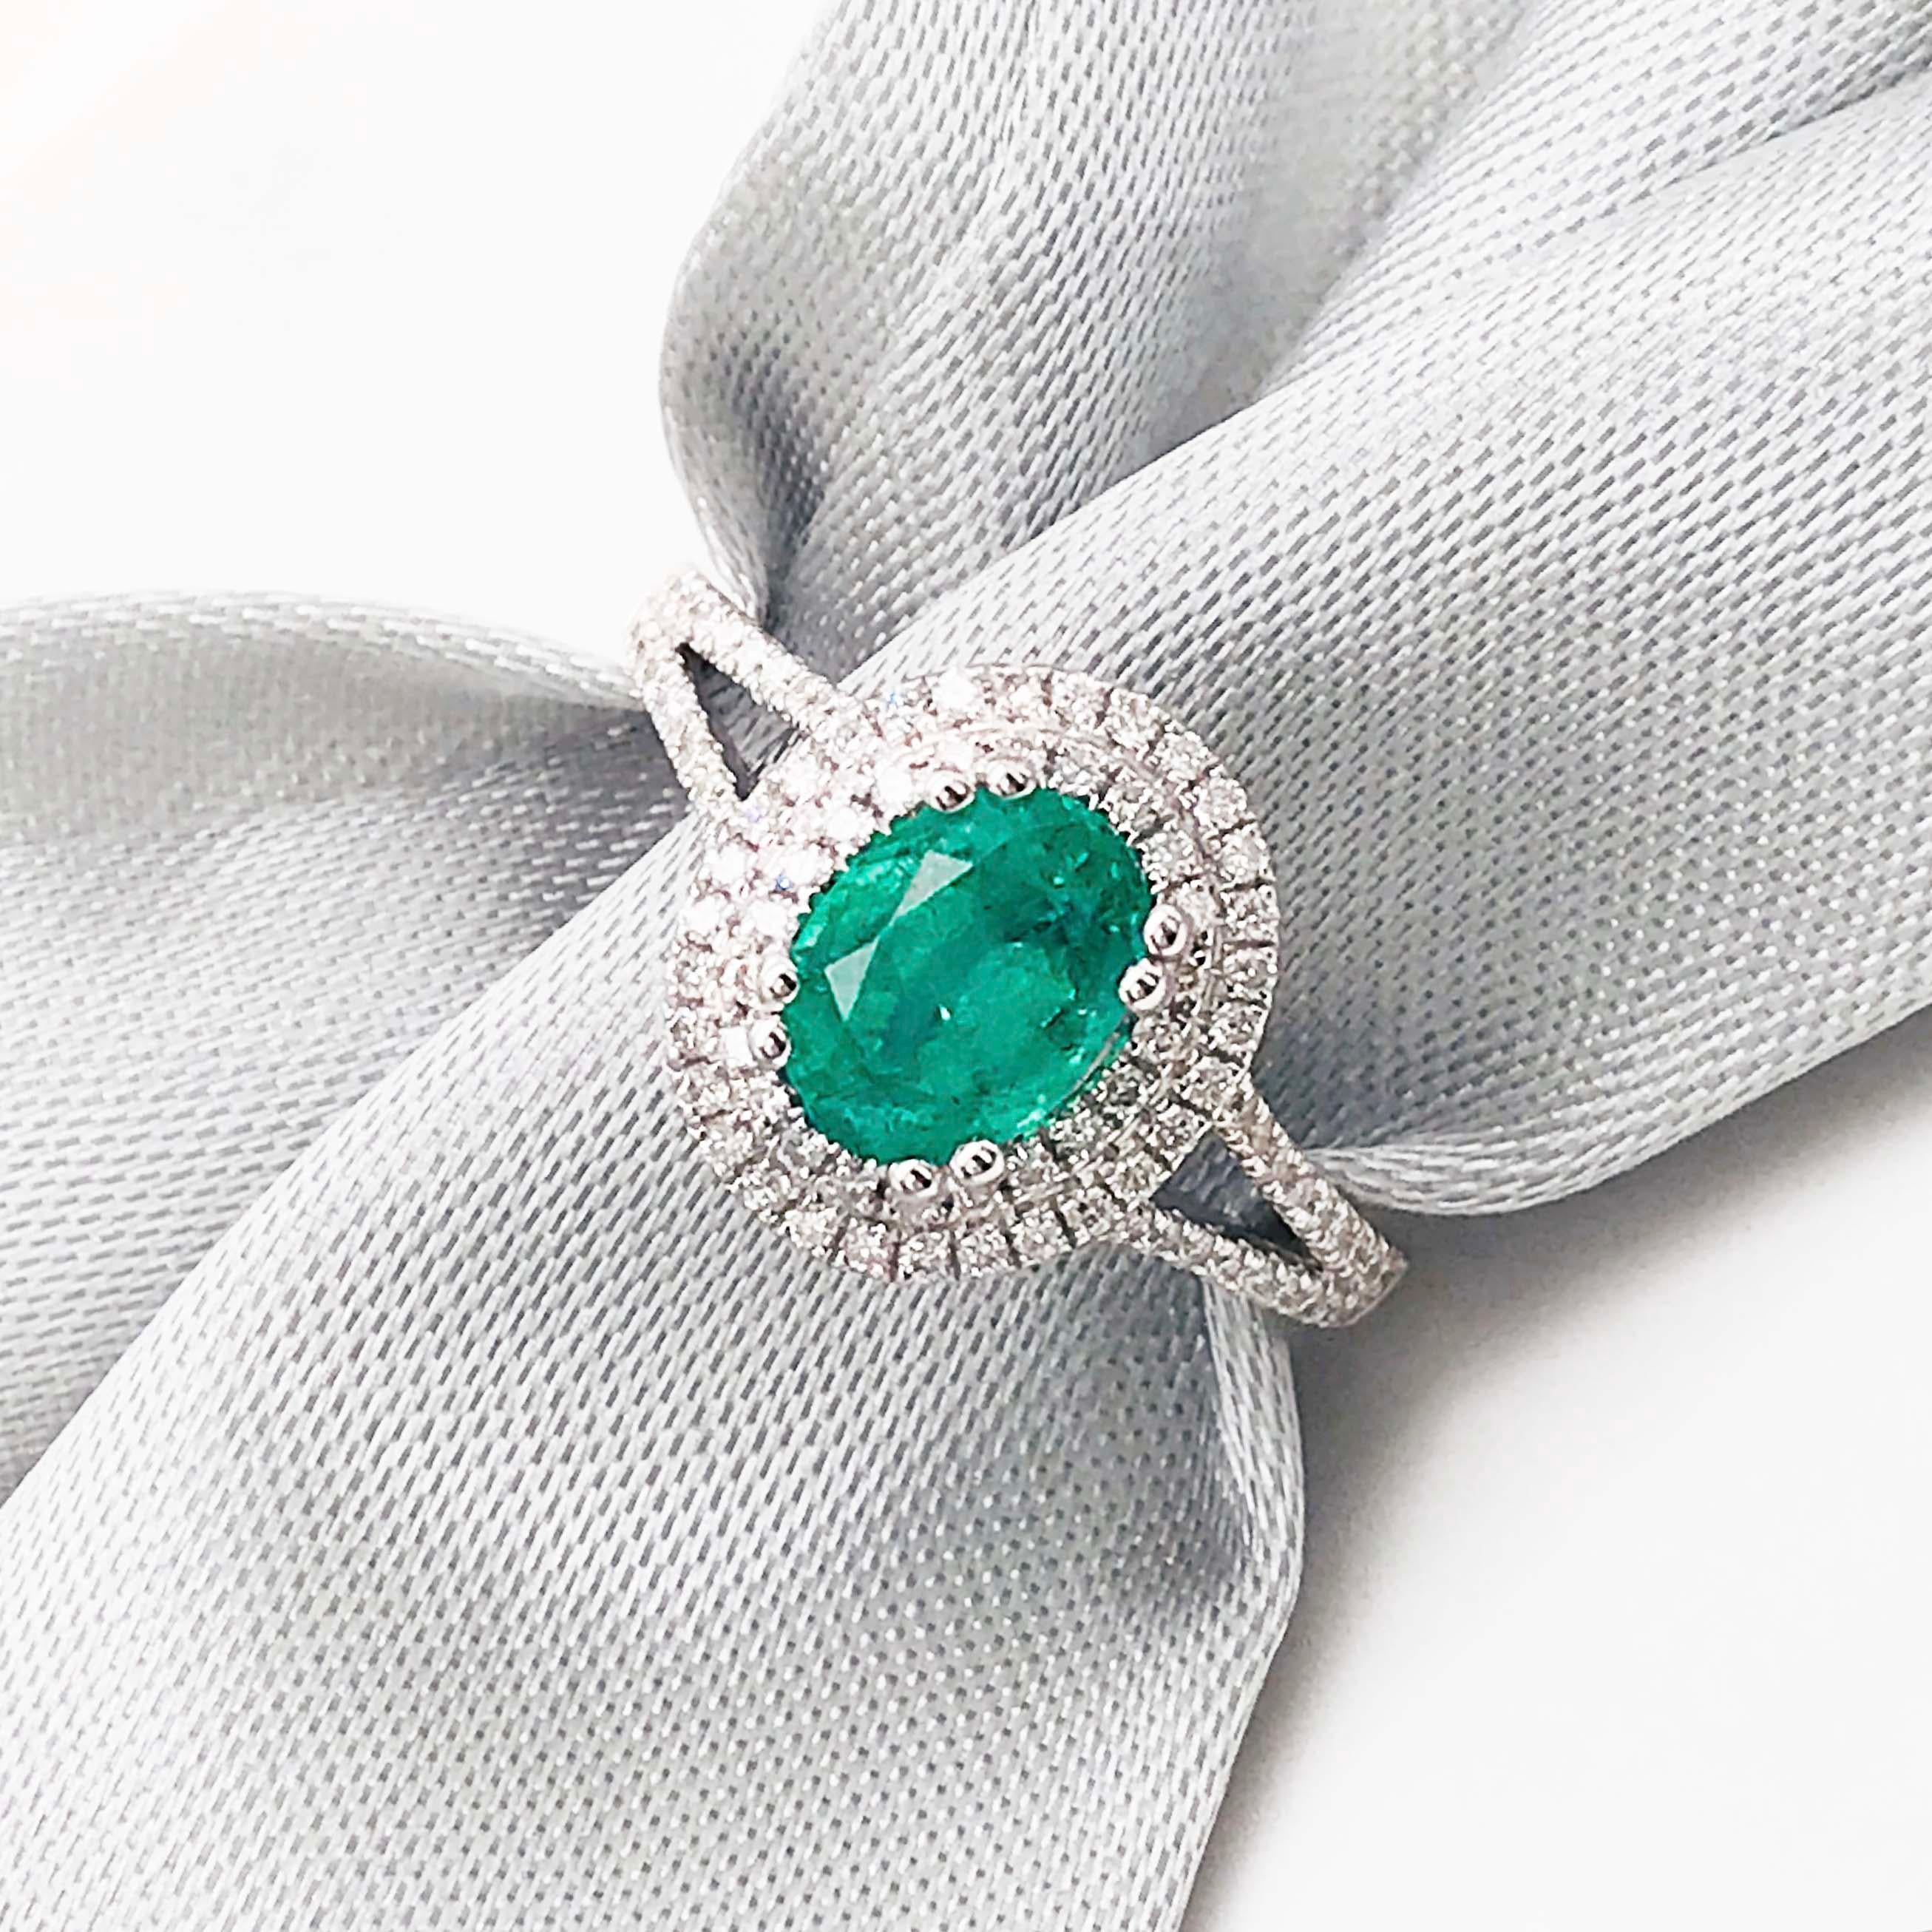 The stunner genuine emerald and diamond ring is breathtaking with a 1.19-carat genuine emerald gemstone set in the center. The genuine Brazilian emerald gemstone has been cut in an oval shape that showcased the emerald natural green perfectly. This